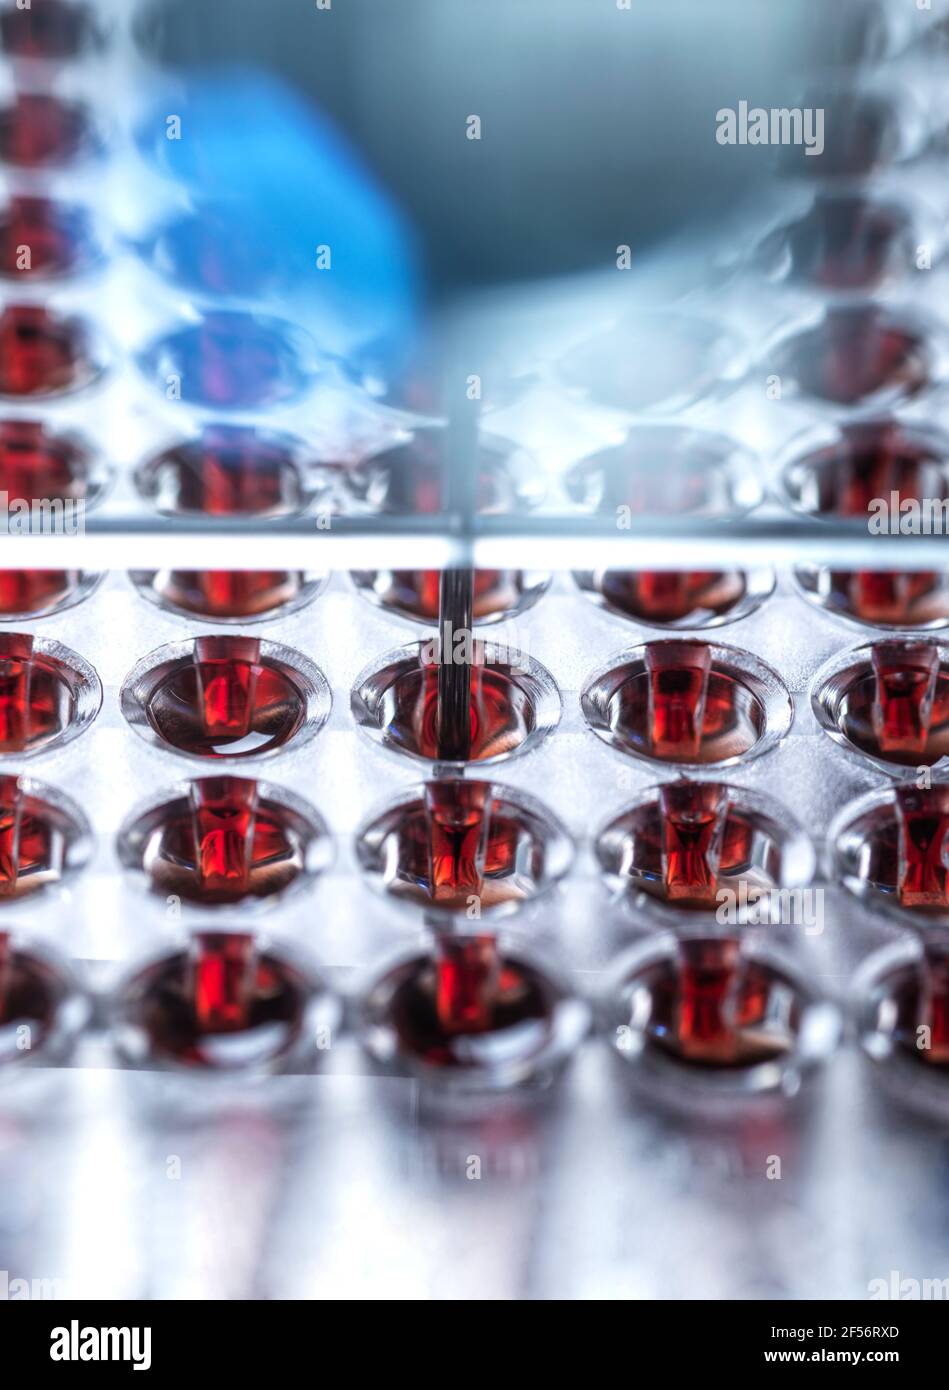 Blood samples for medical test in lab Stock Photo